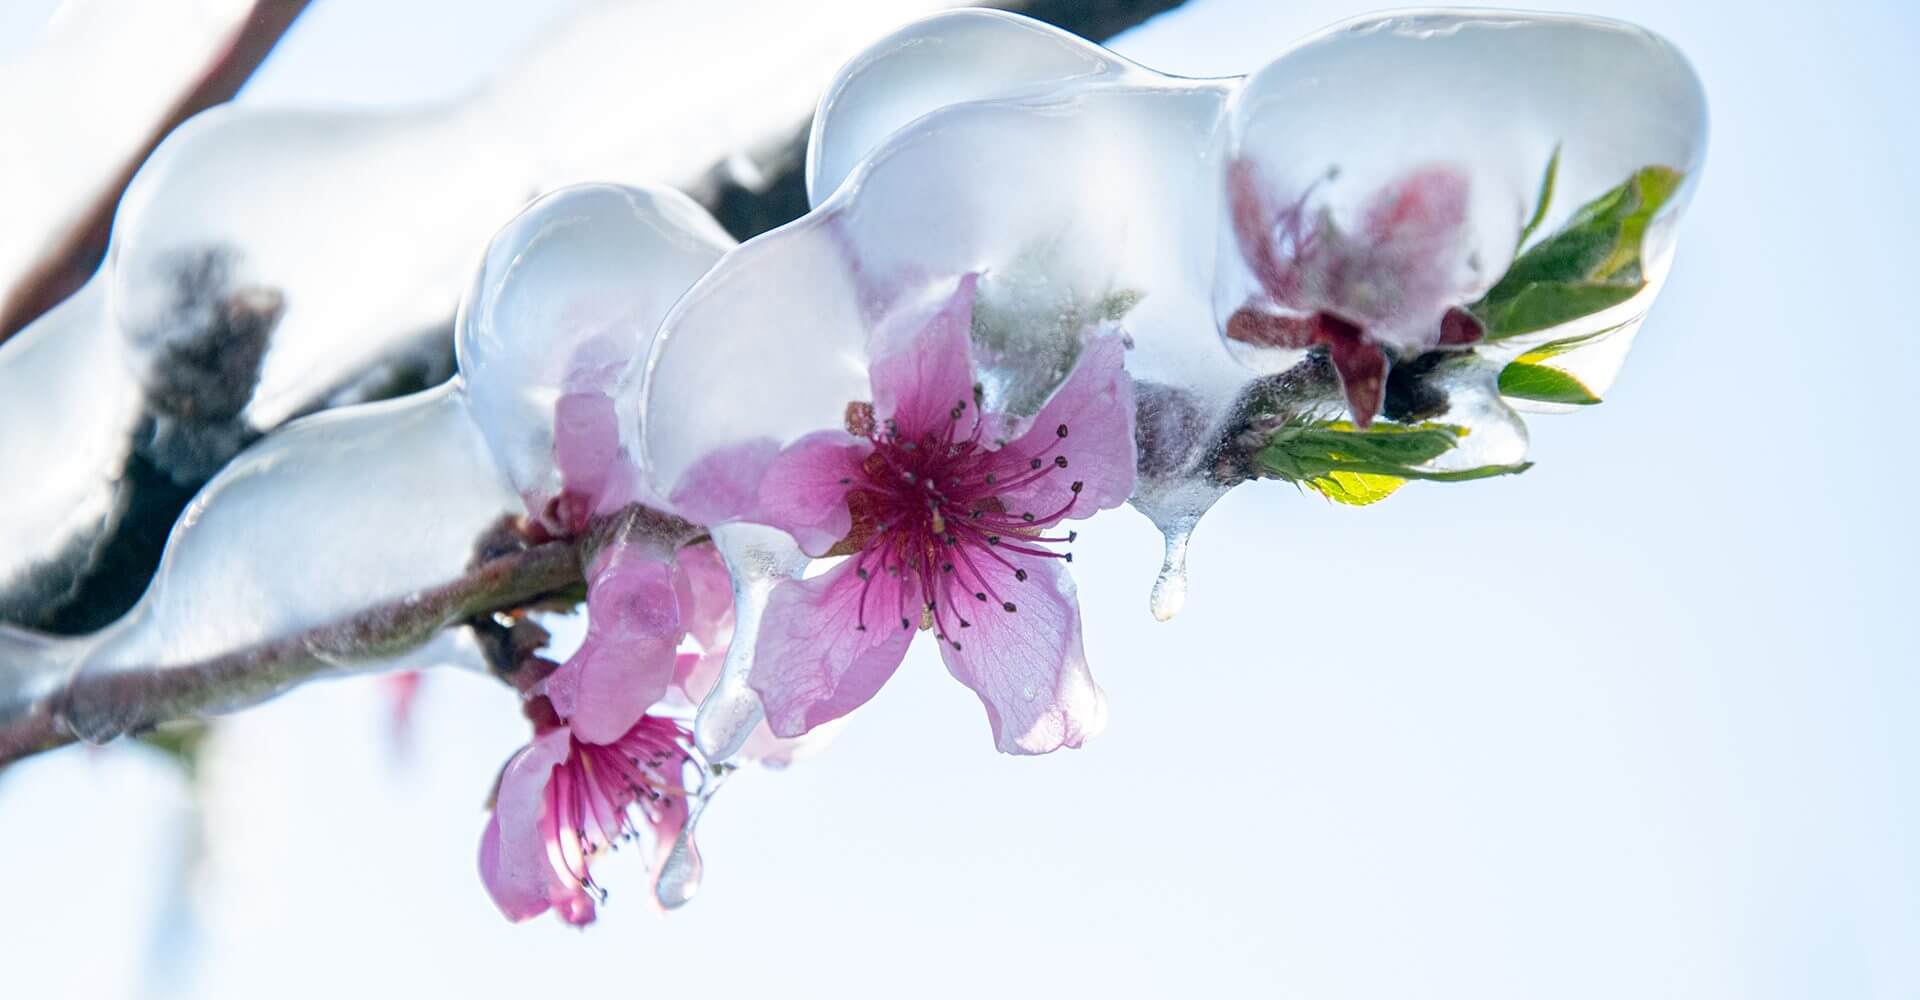 Flowers melt from a winter storm, will inflation stay the same or change with the seasons?